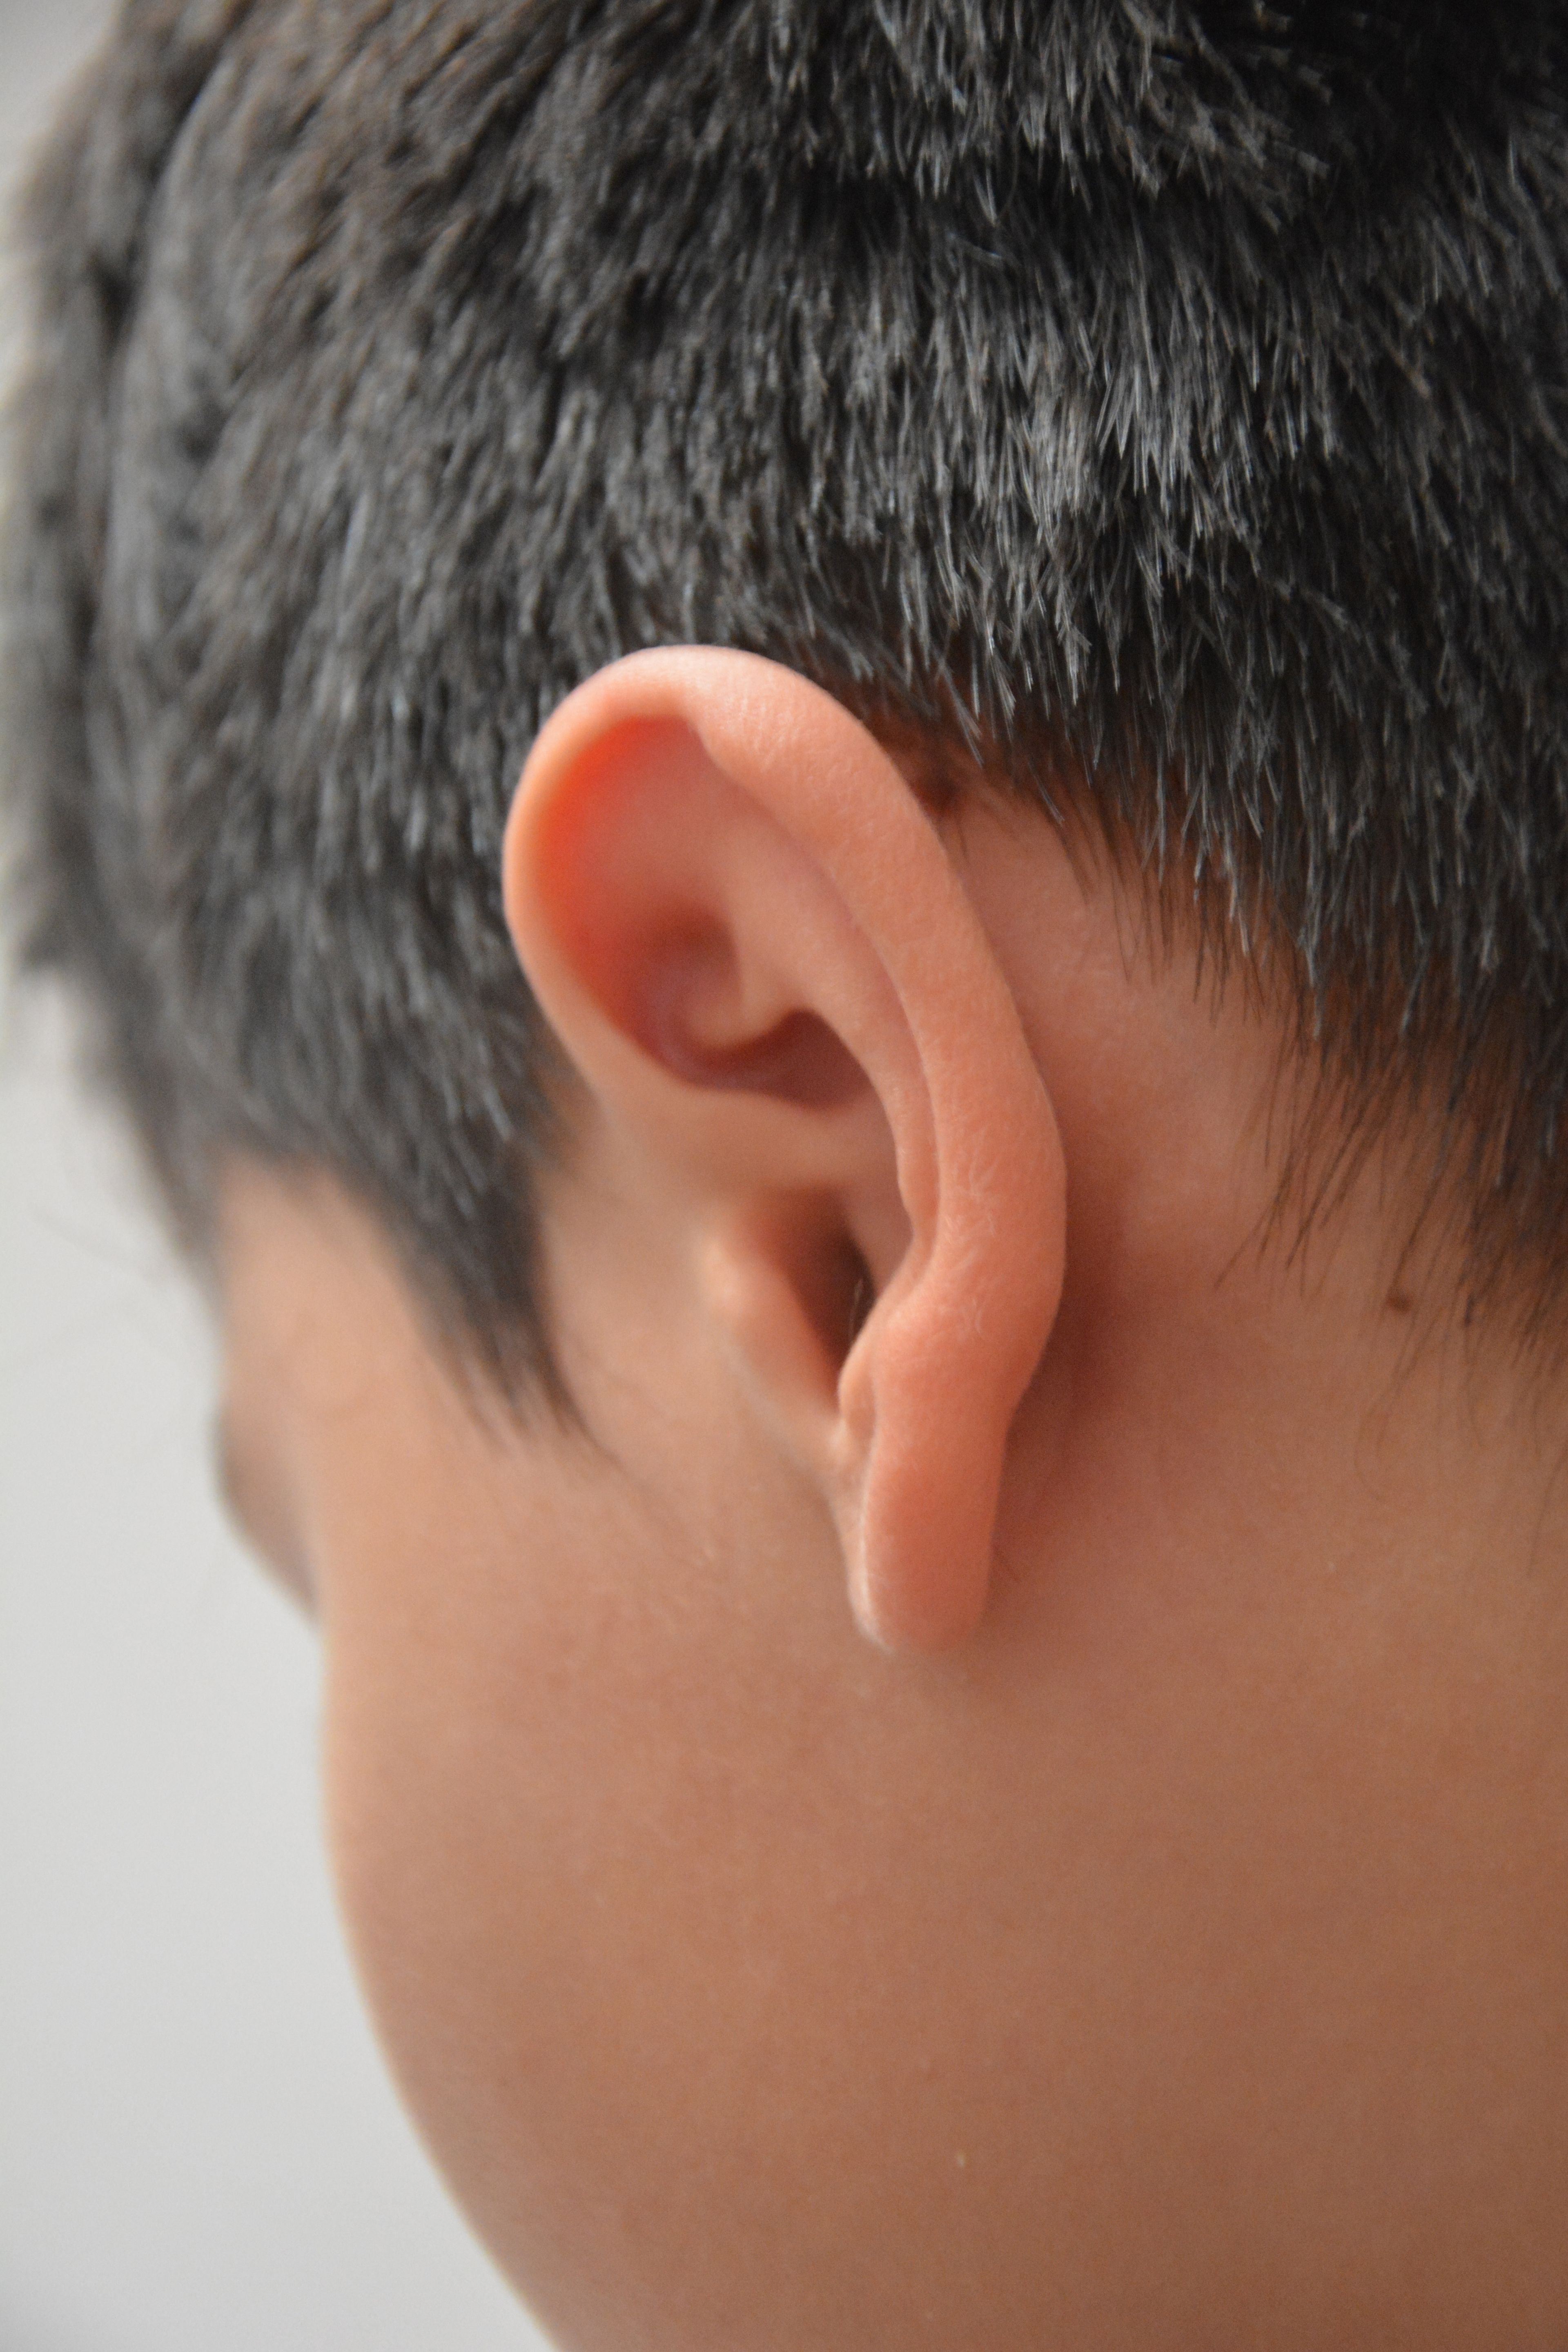 A child’s ear.